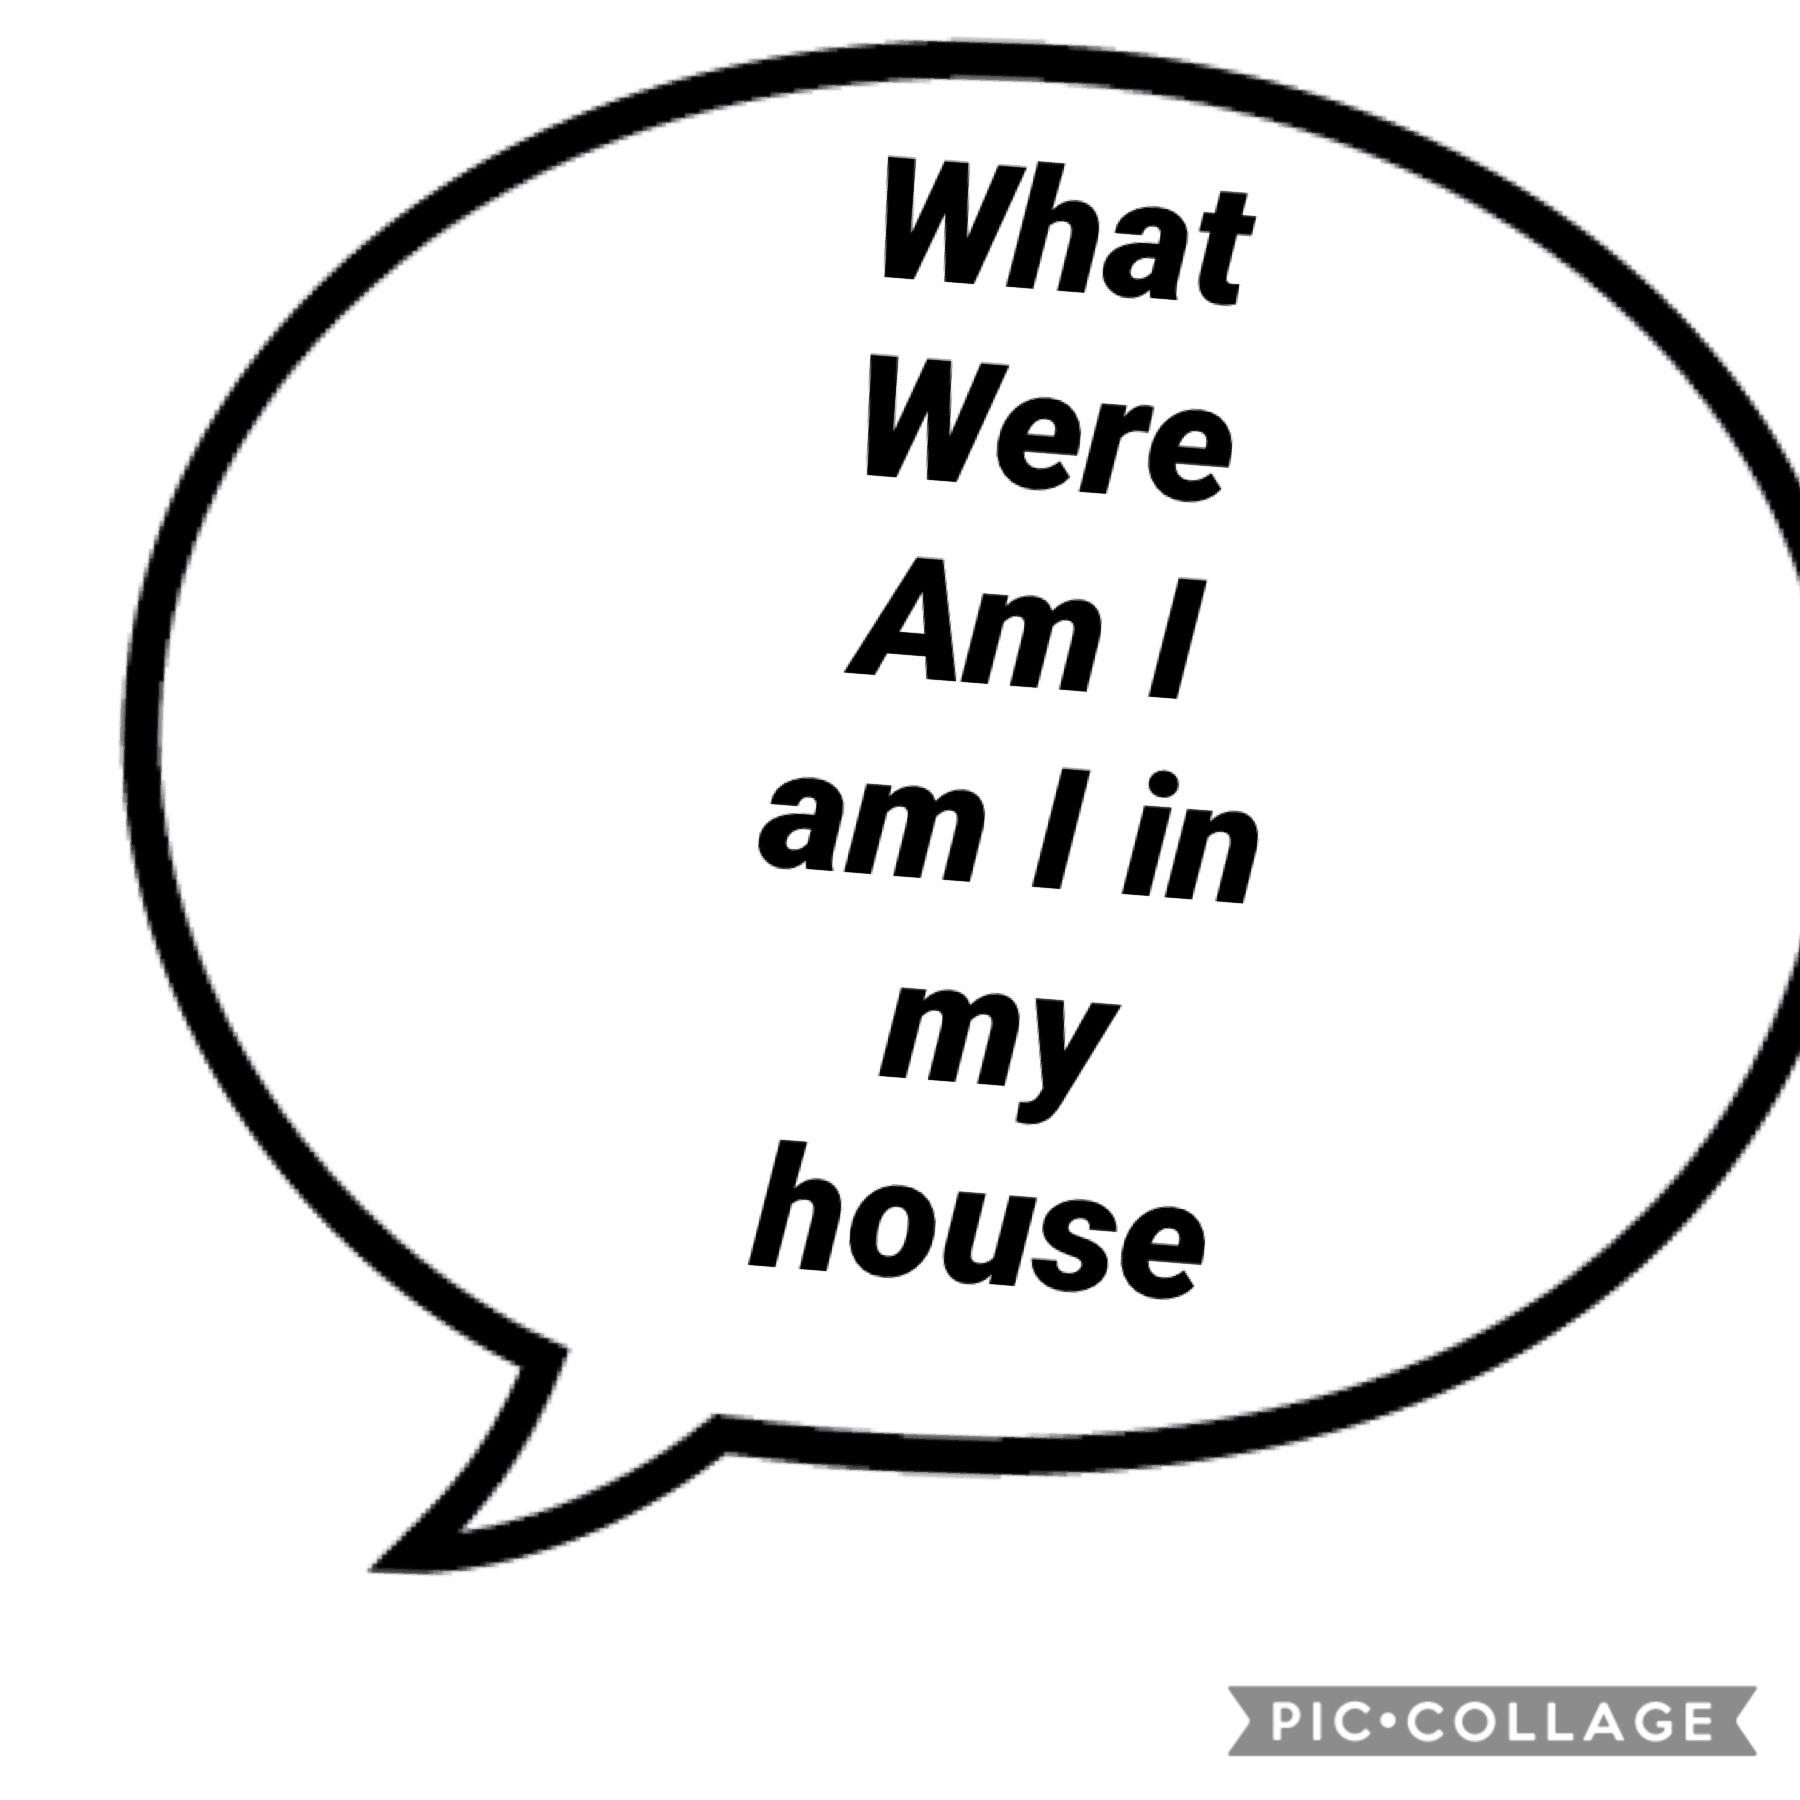 Am I in my house